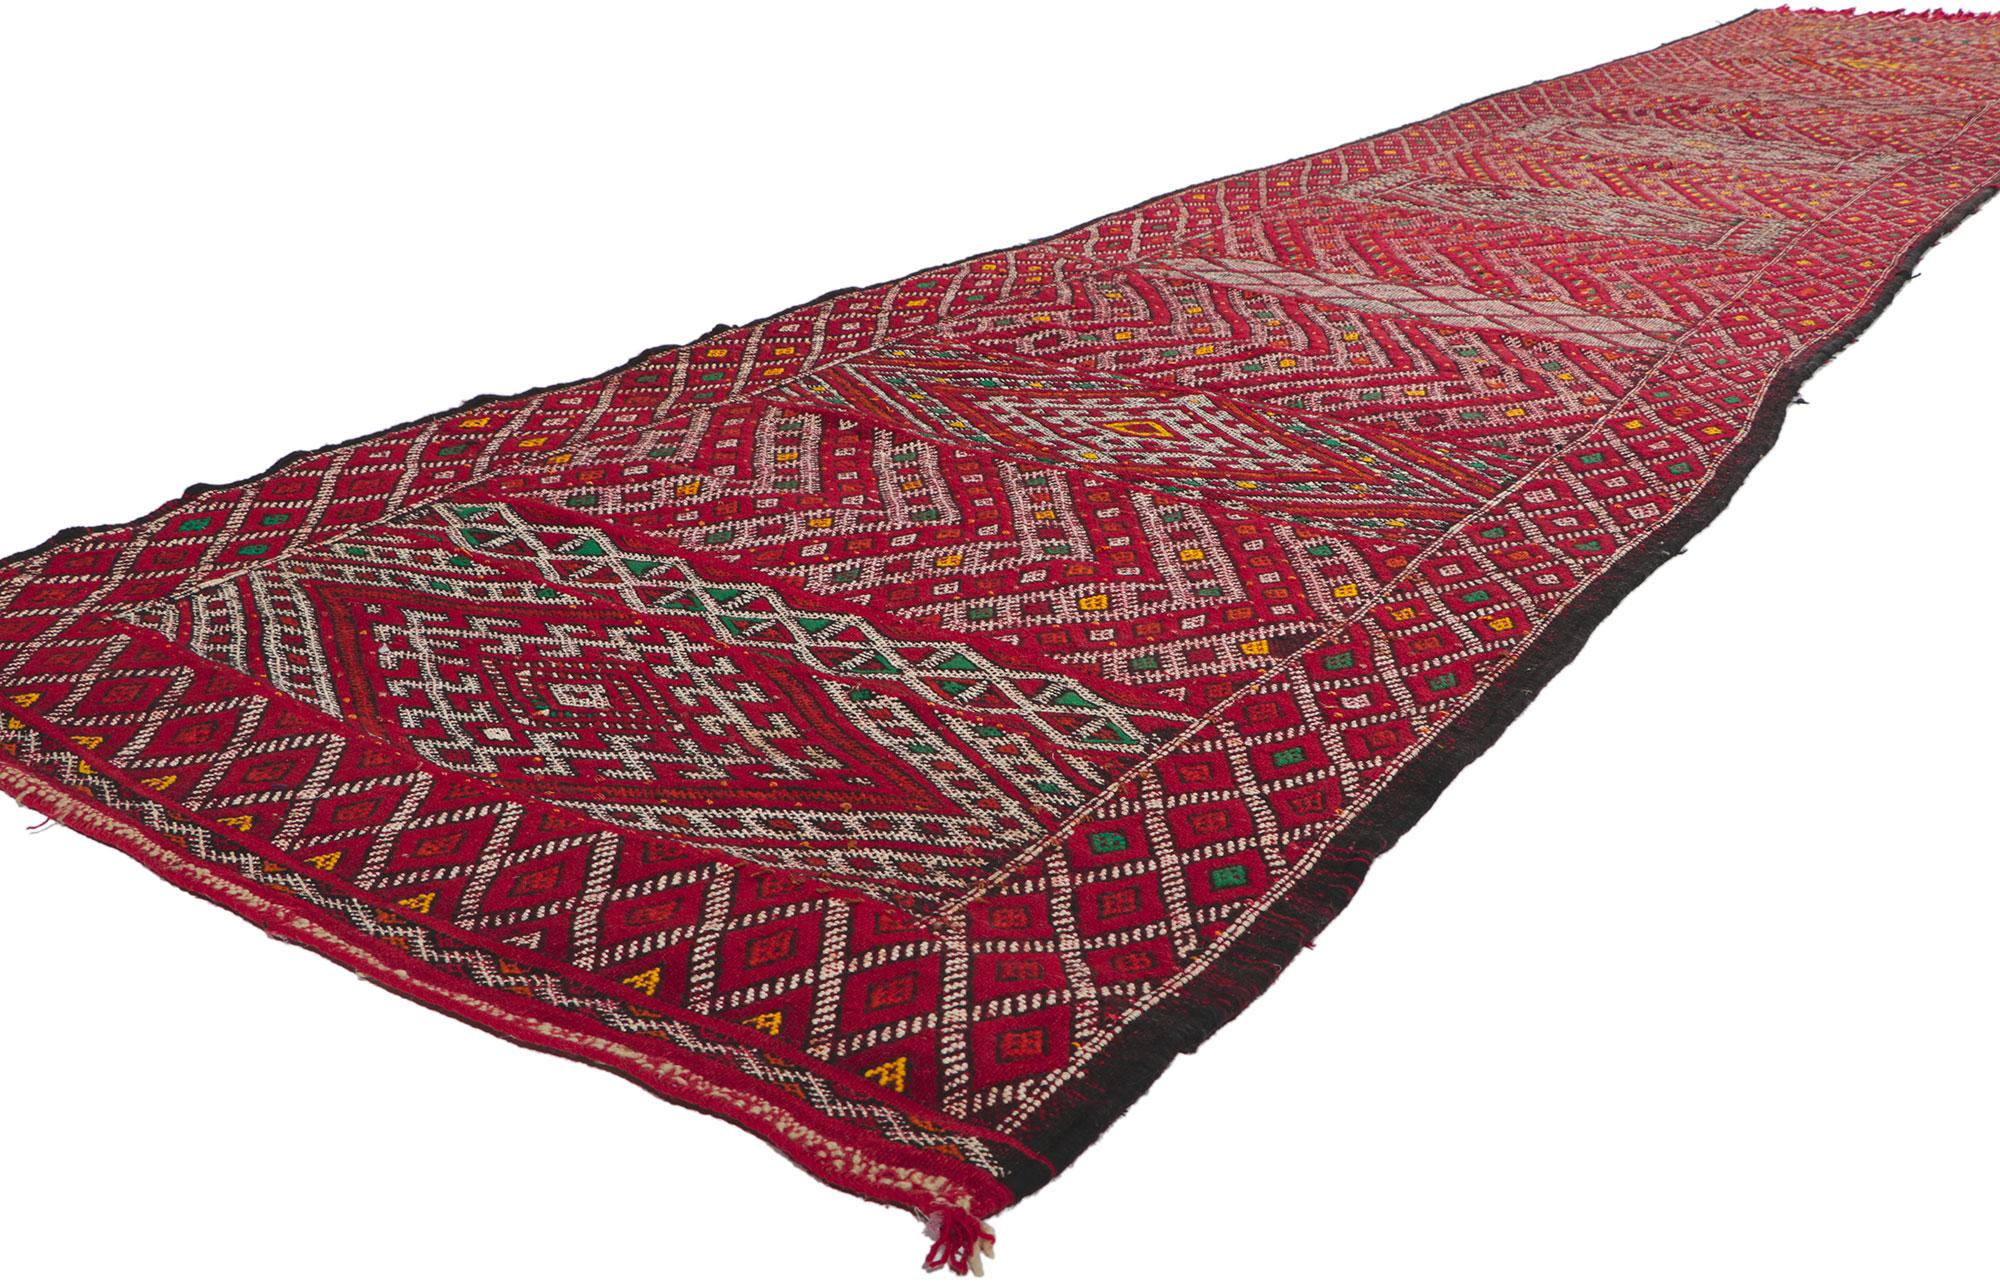 21706 Vintage Zemmour Moroccan Kilim Runner, 03'06 x 19'04. Full of tiny details and tribal style, this hand-woven wool vintage Zemmour Berber Moroccan kilim rug runner is a captivating vision of woven beauty. The abrashed field is composed of